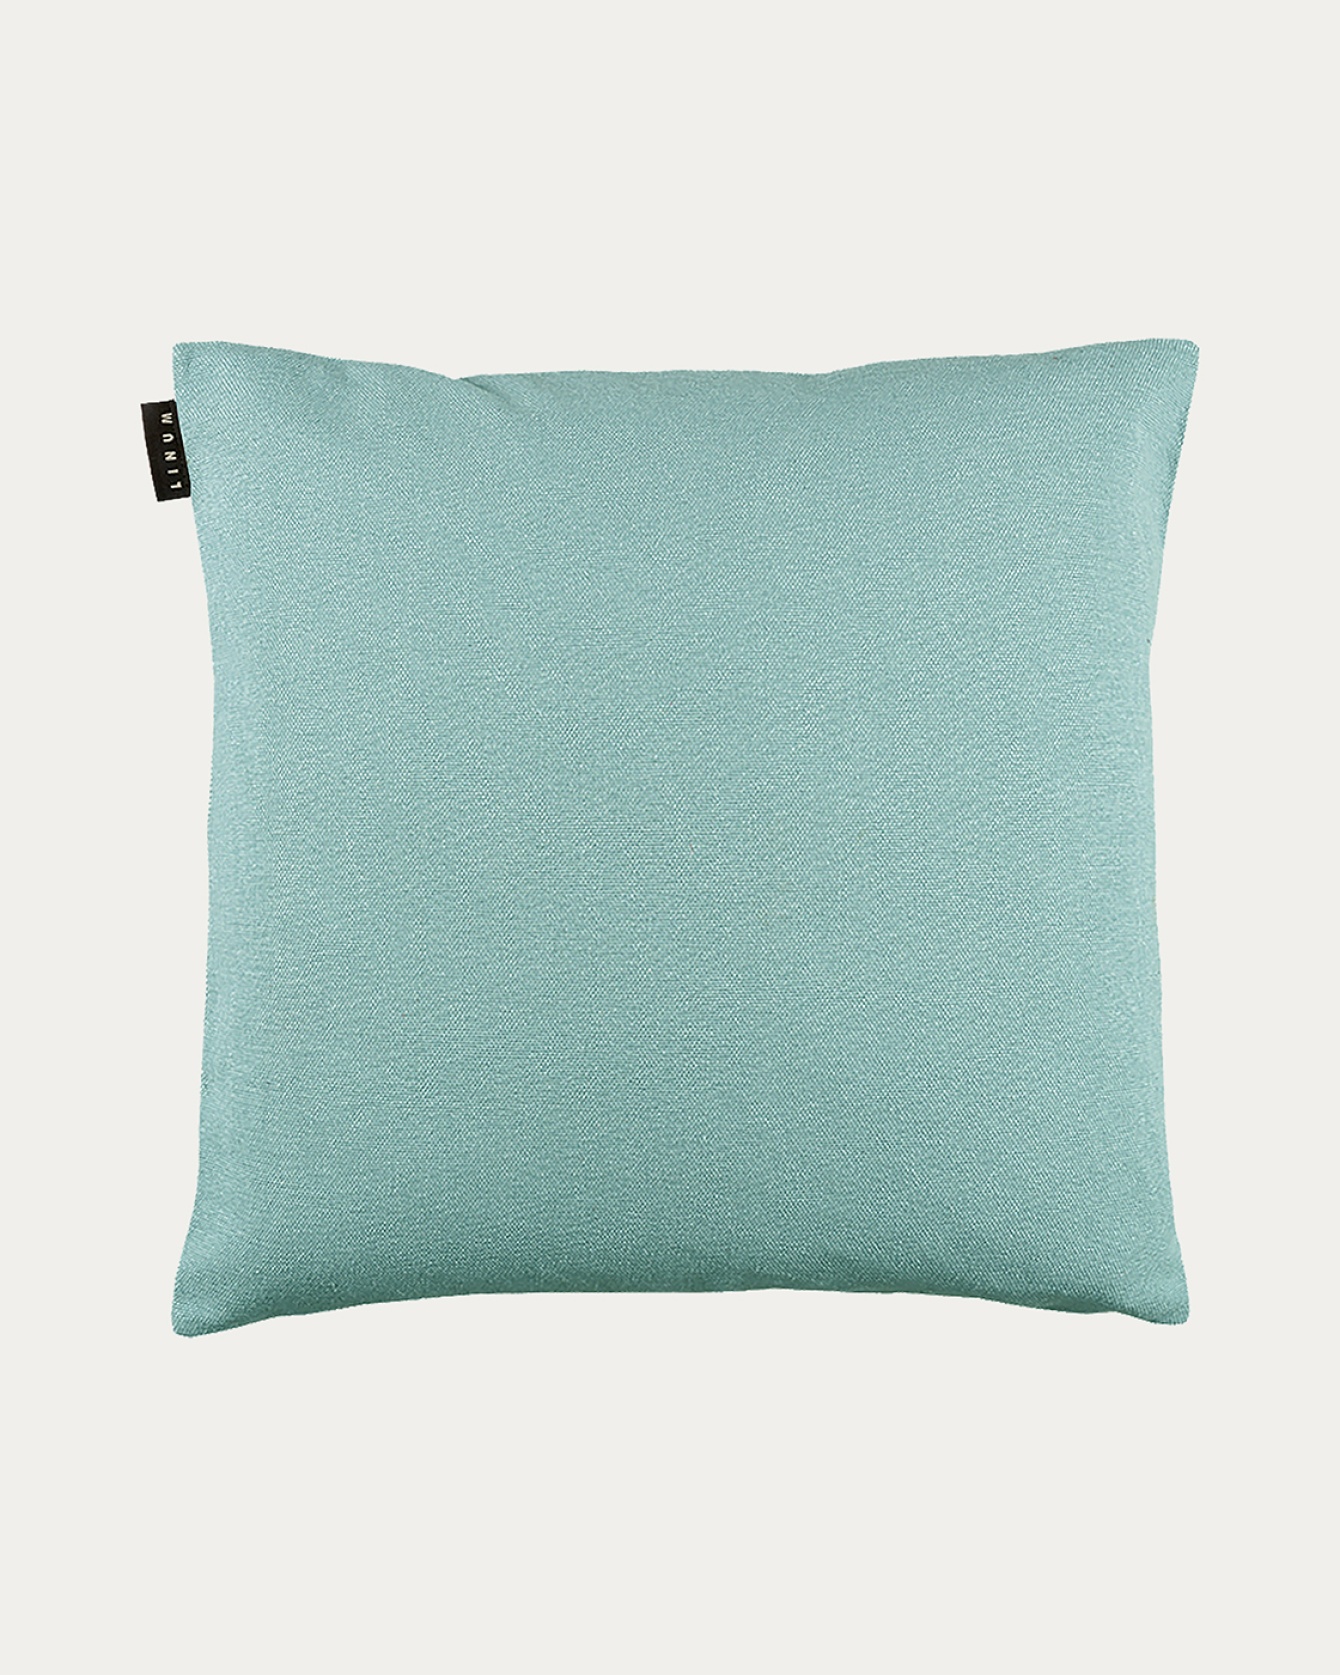 PEPPER Cushion cover 50x50 cm Dusty turquoise